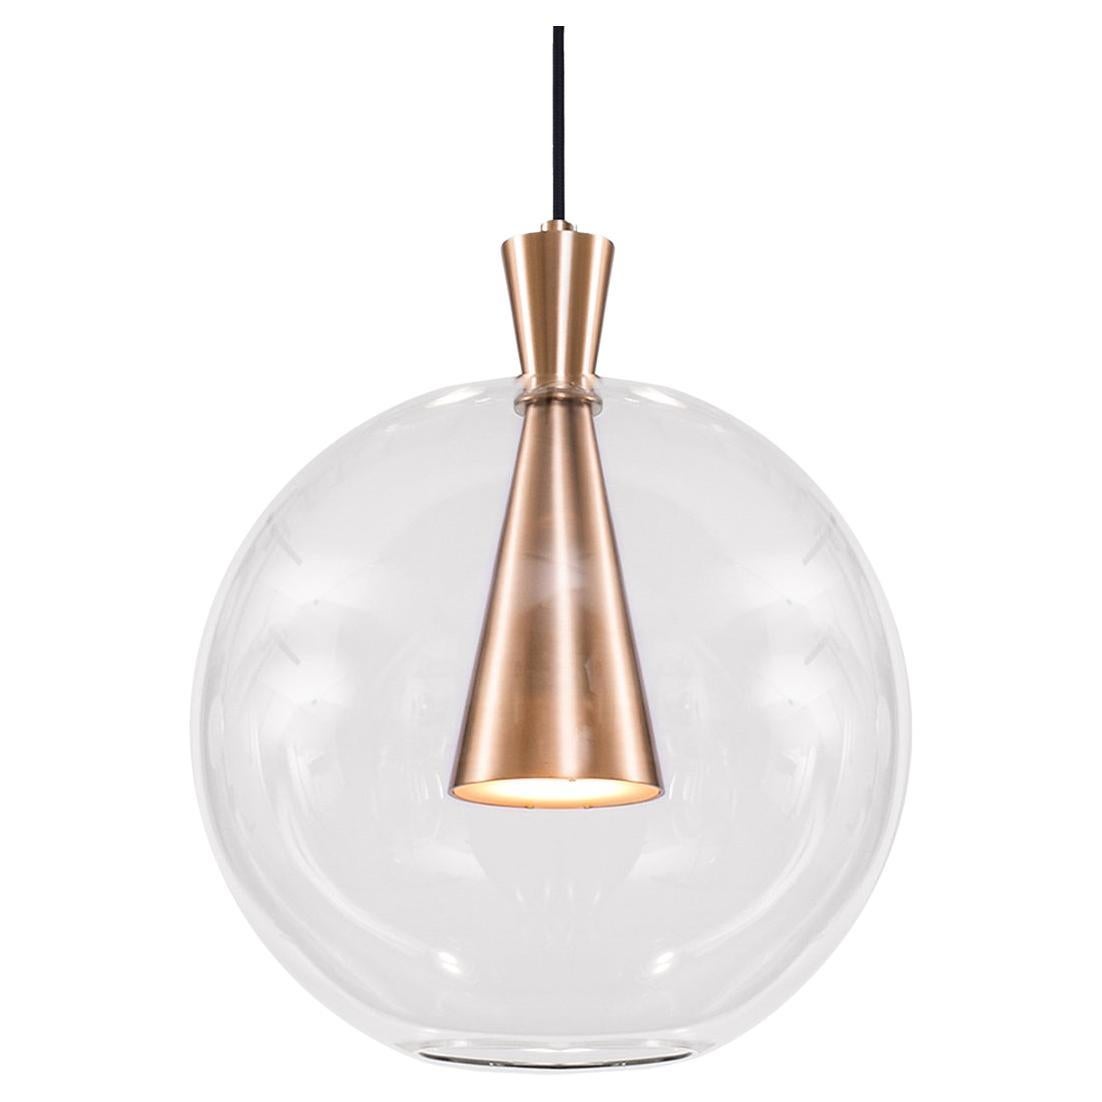 Cone Pendant Lamp and Shade 'Small' by Marc Wood, Handmade Brass Lamp w/GU10